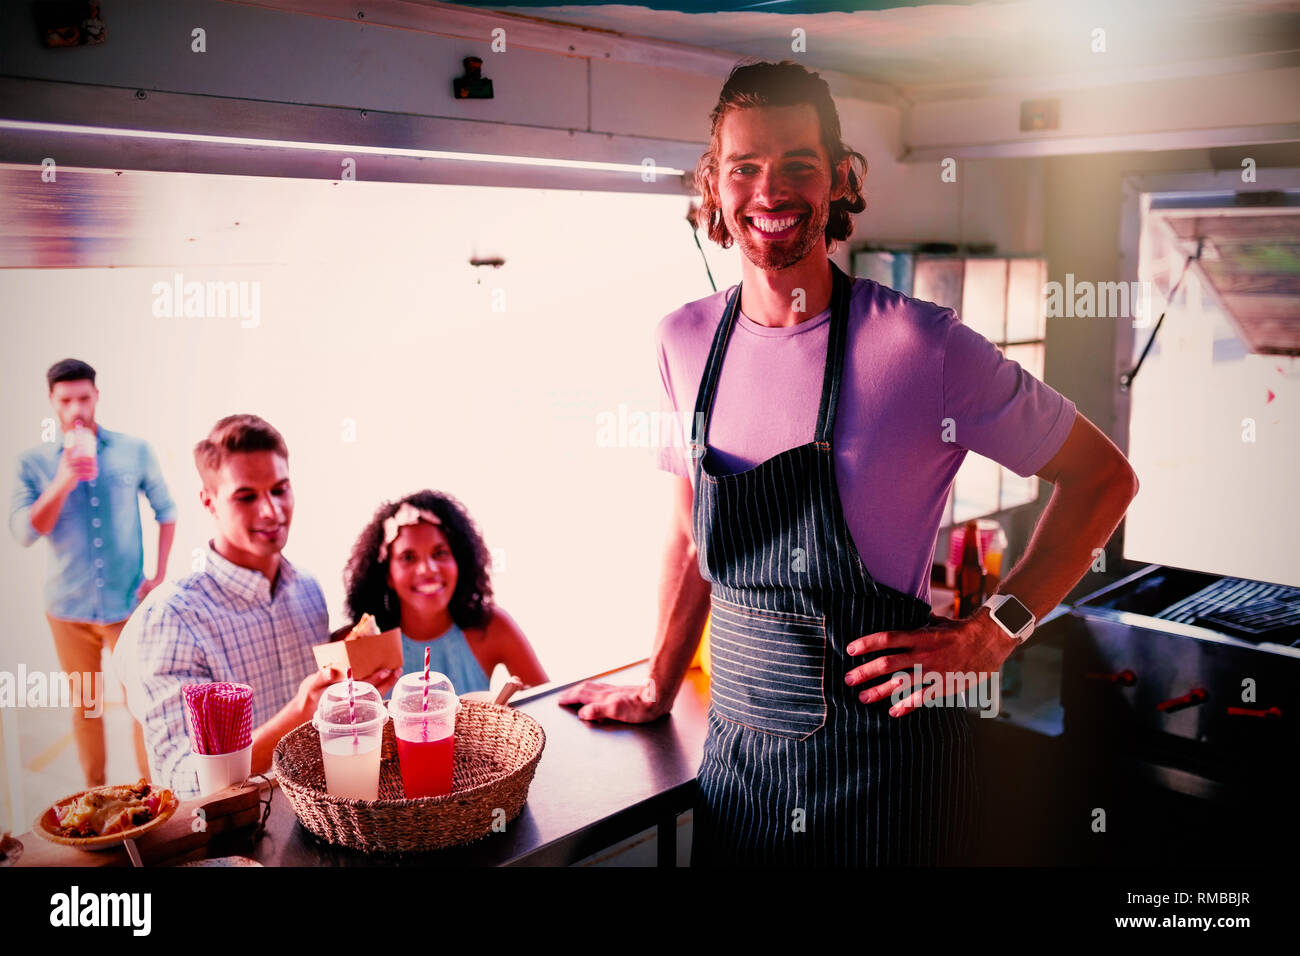 Customers and waiter standing at food truck counter Stock Photo